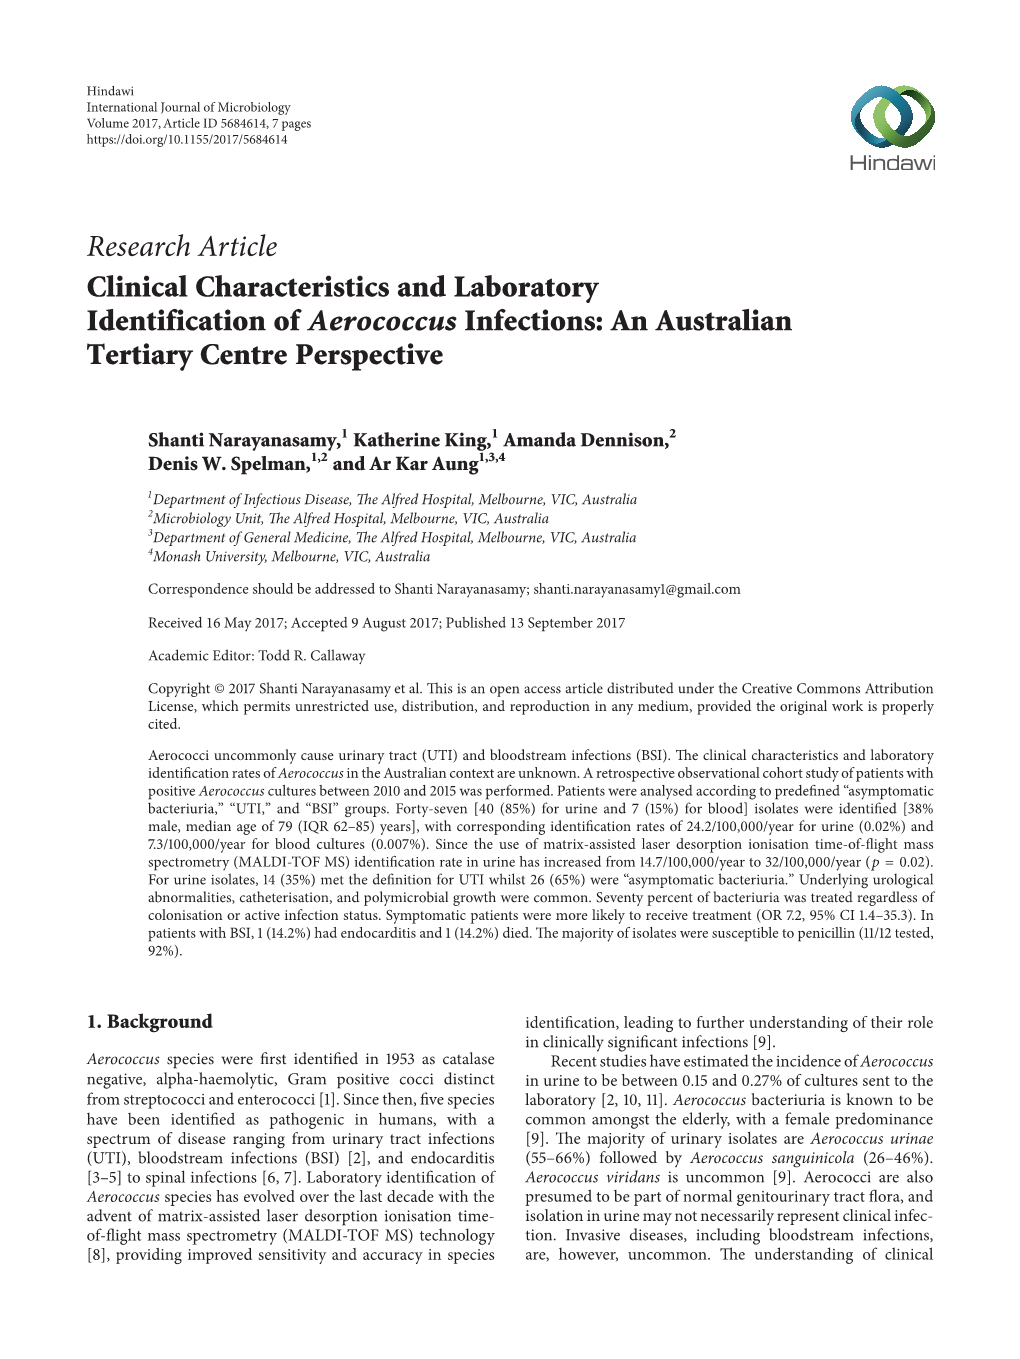 Clinical Characteristics and Laboratory Identification of Aerococcus Infections: an Australian Tertiary Centre Perspective